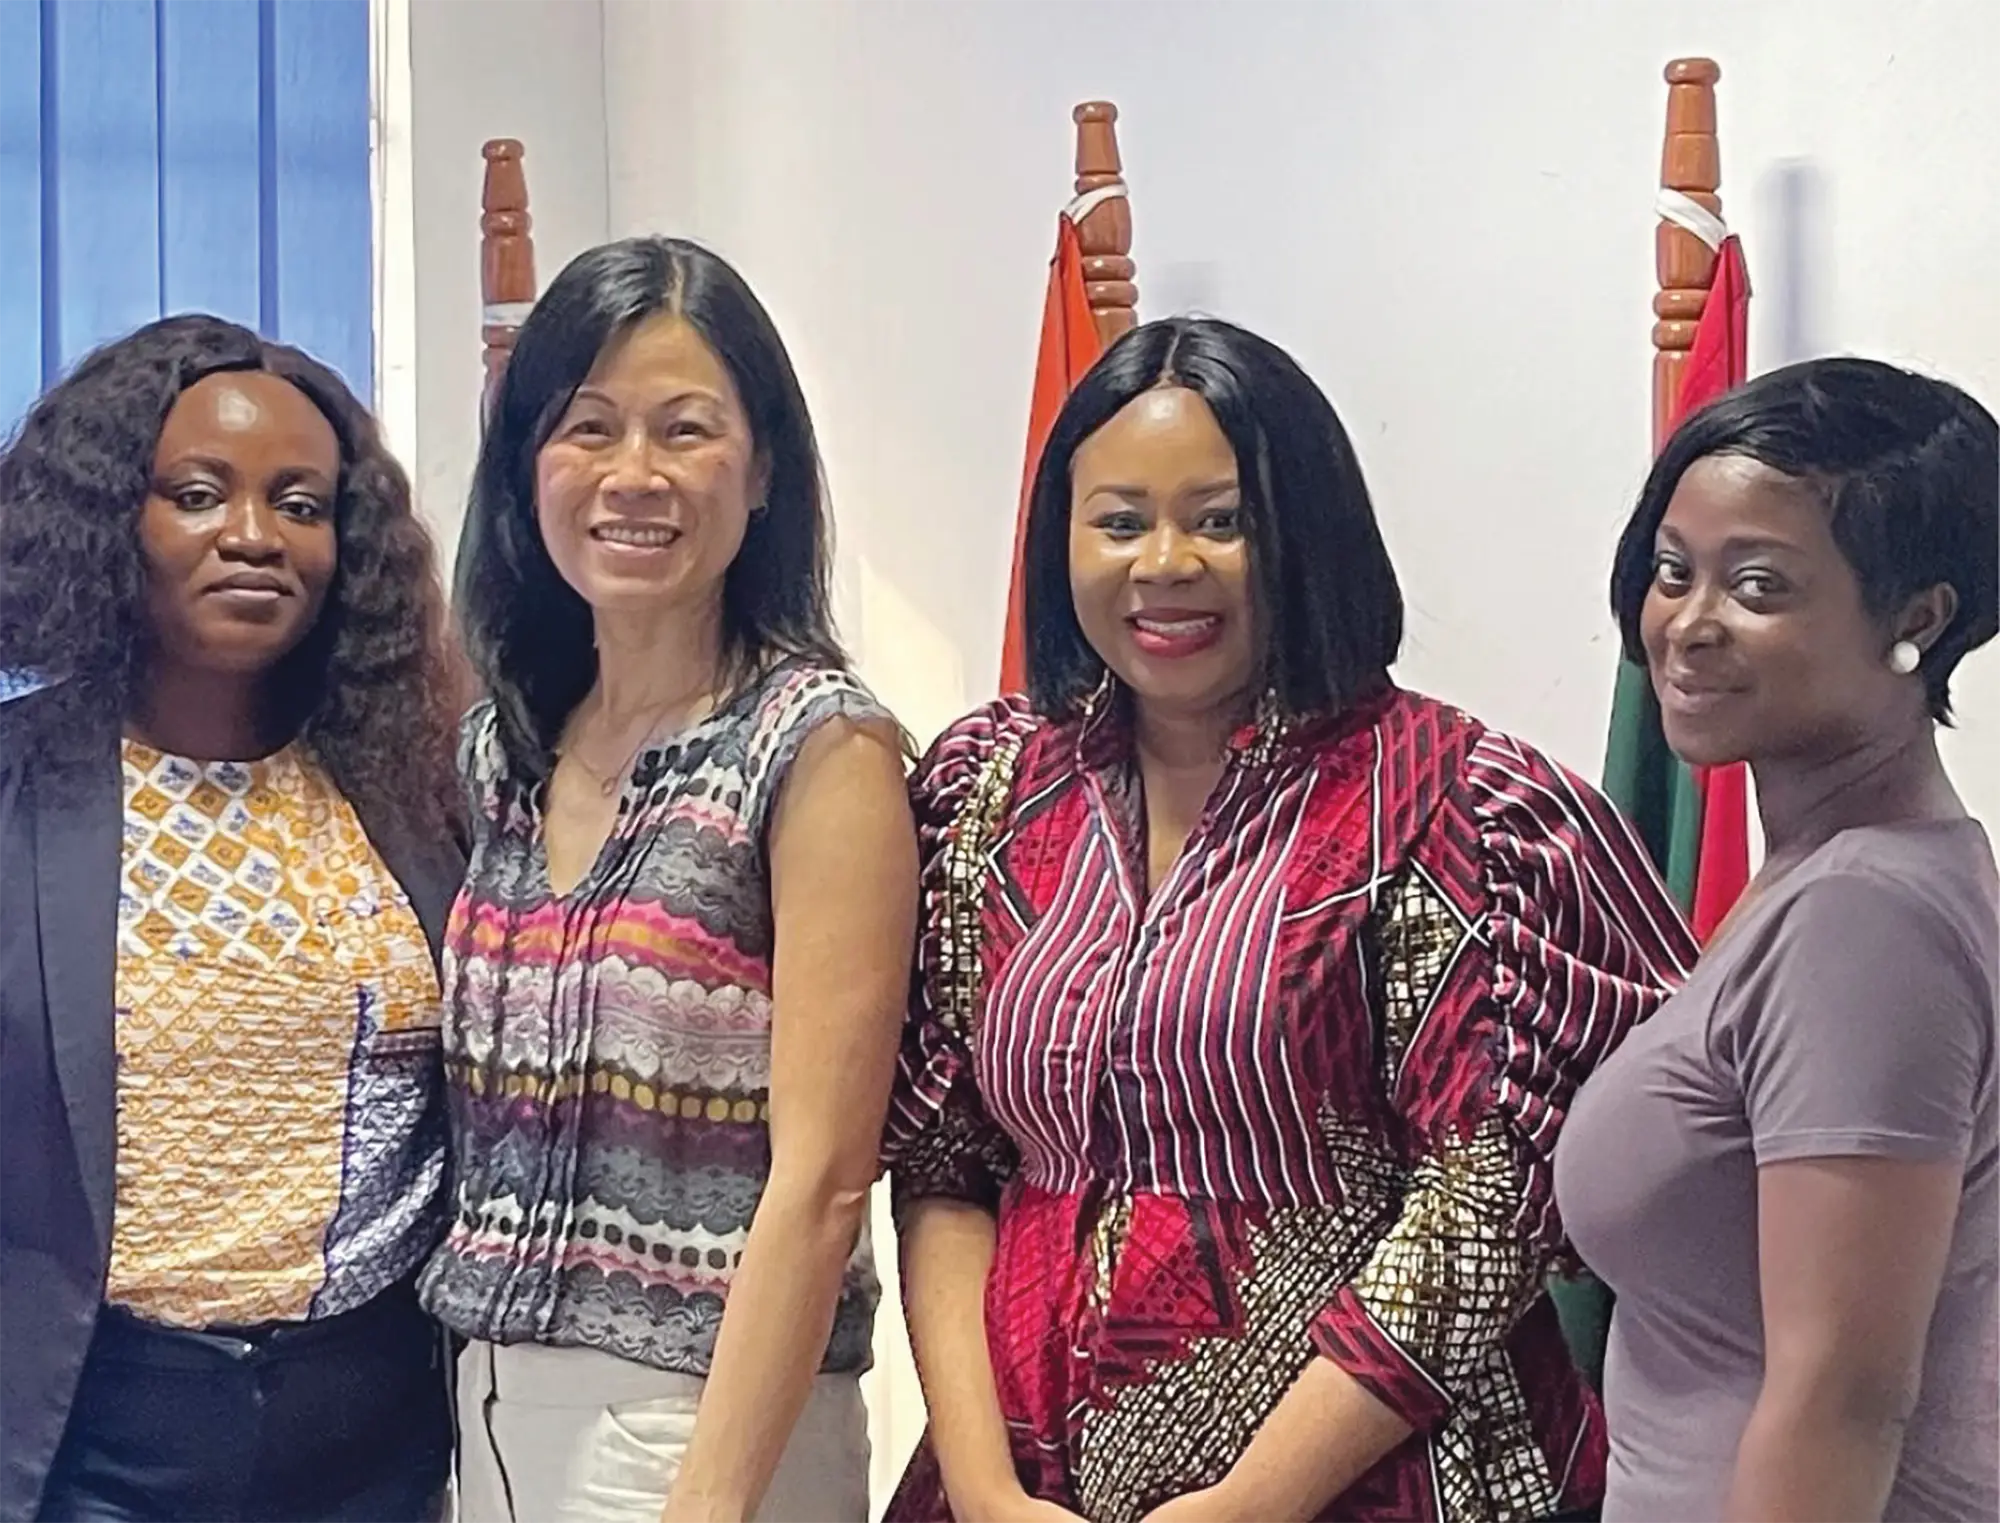 Linda Tam ’00 (second from left) worked with University of Professional Studies, Accra law faculty including Yvette Schandorf-Woode (left), Yorm Ama Abledu (second from right), and Francisca Kusi-Appiah (right).